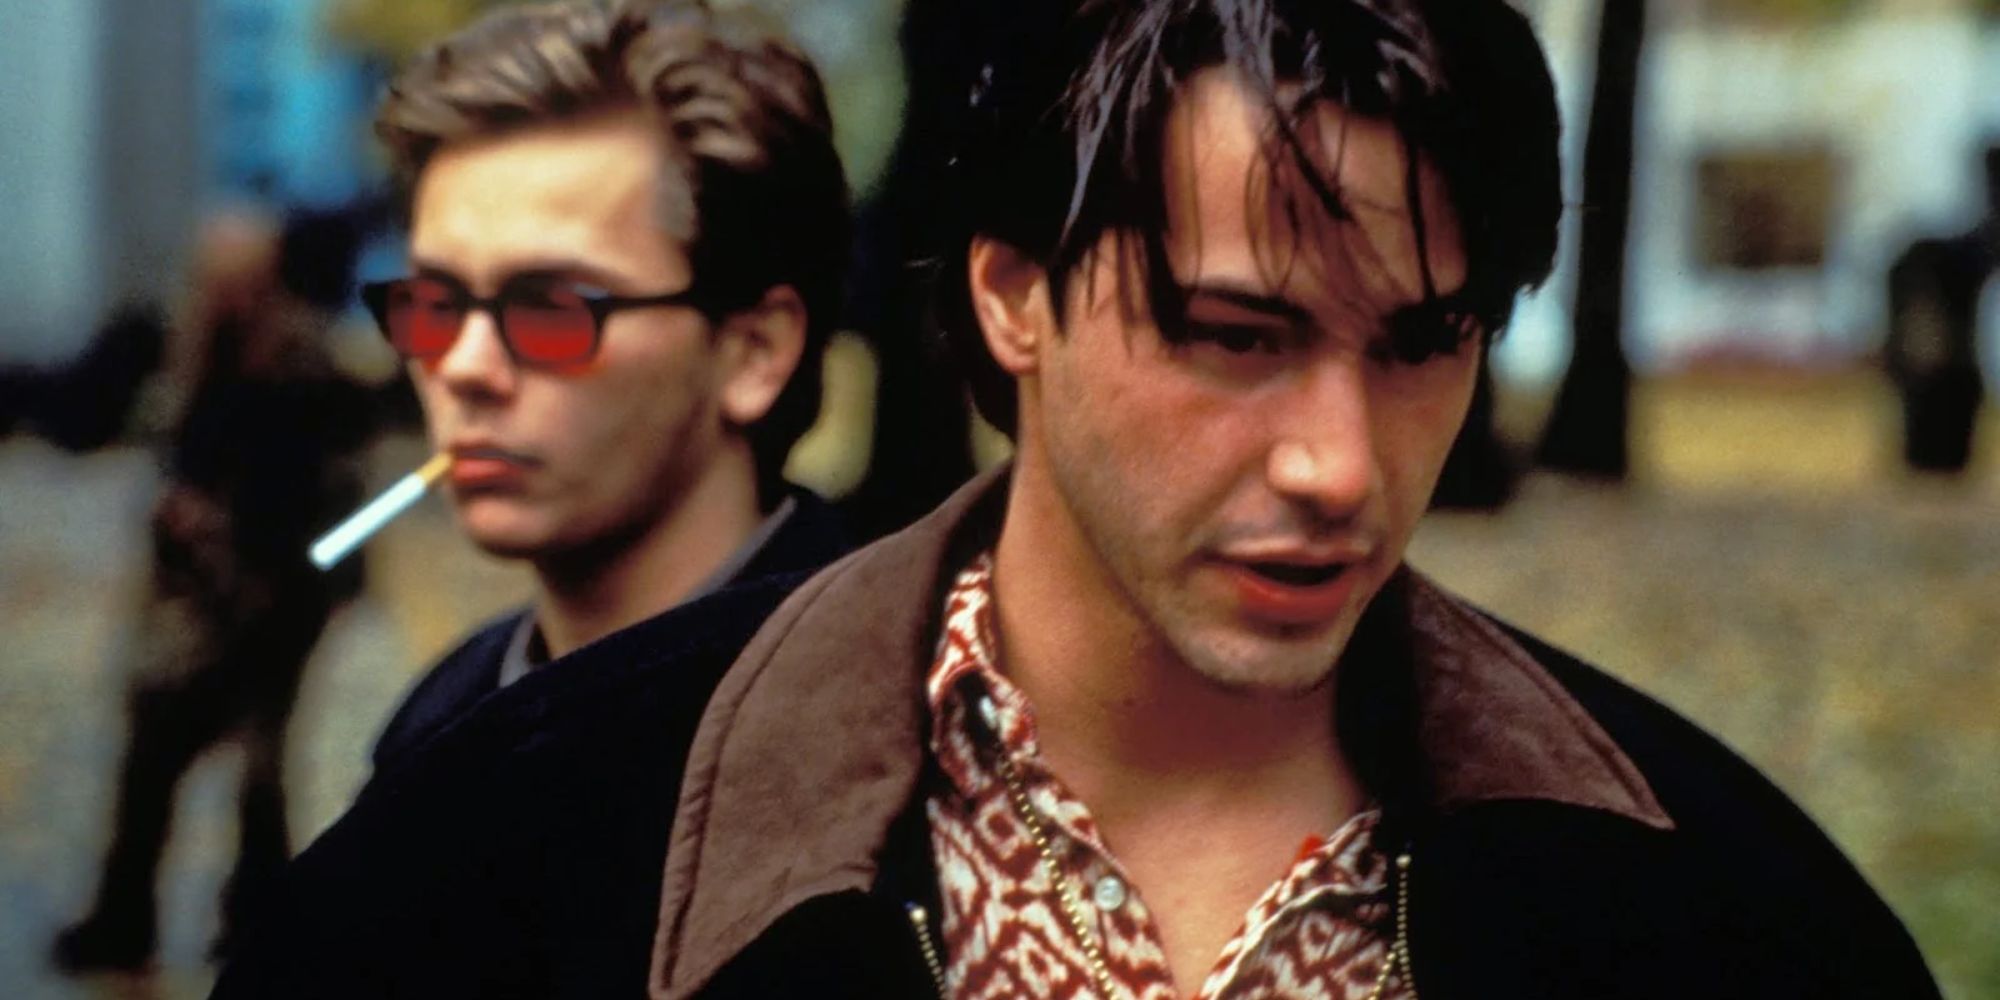 Keanu Reeves and River Phoenix standing behind him in My Own Private Idaho